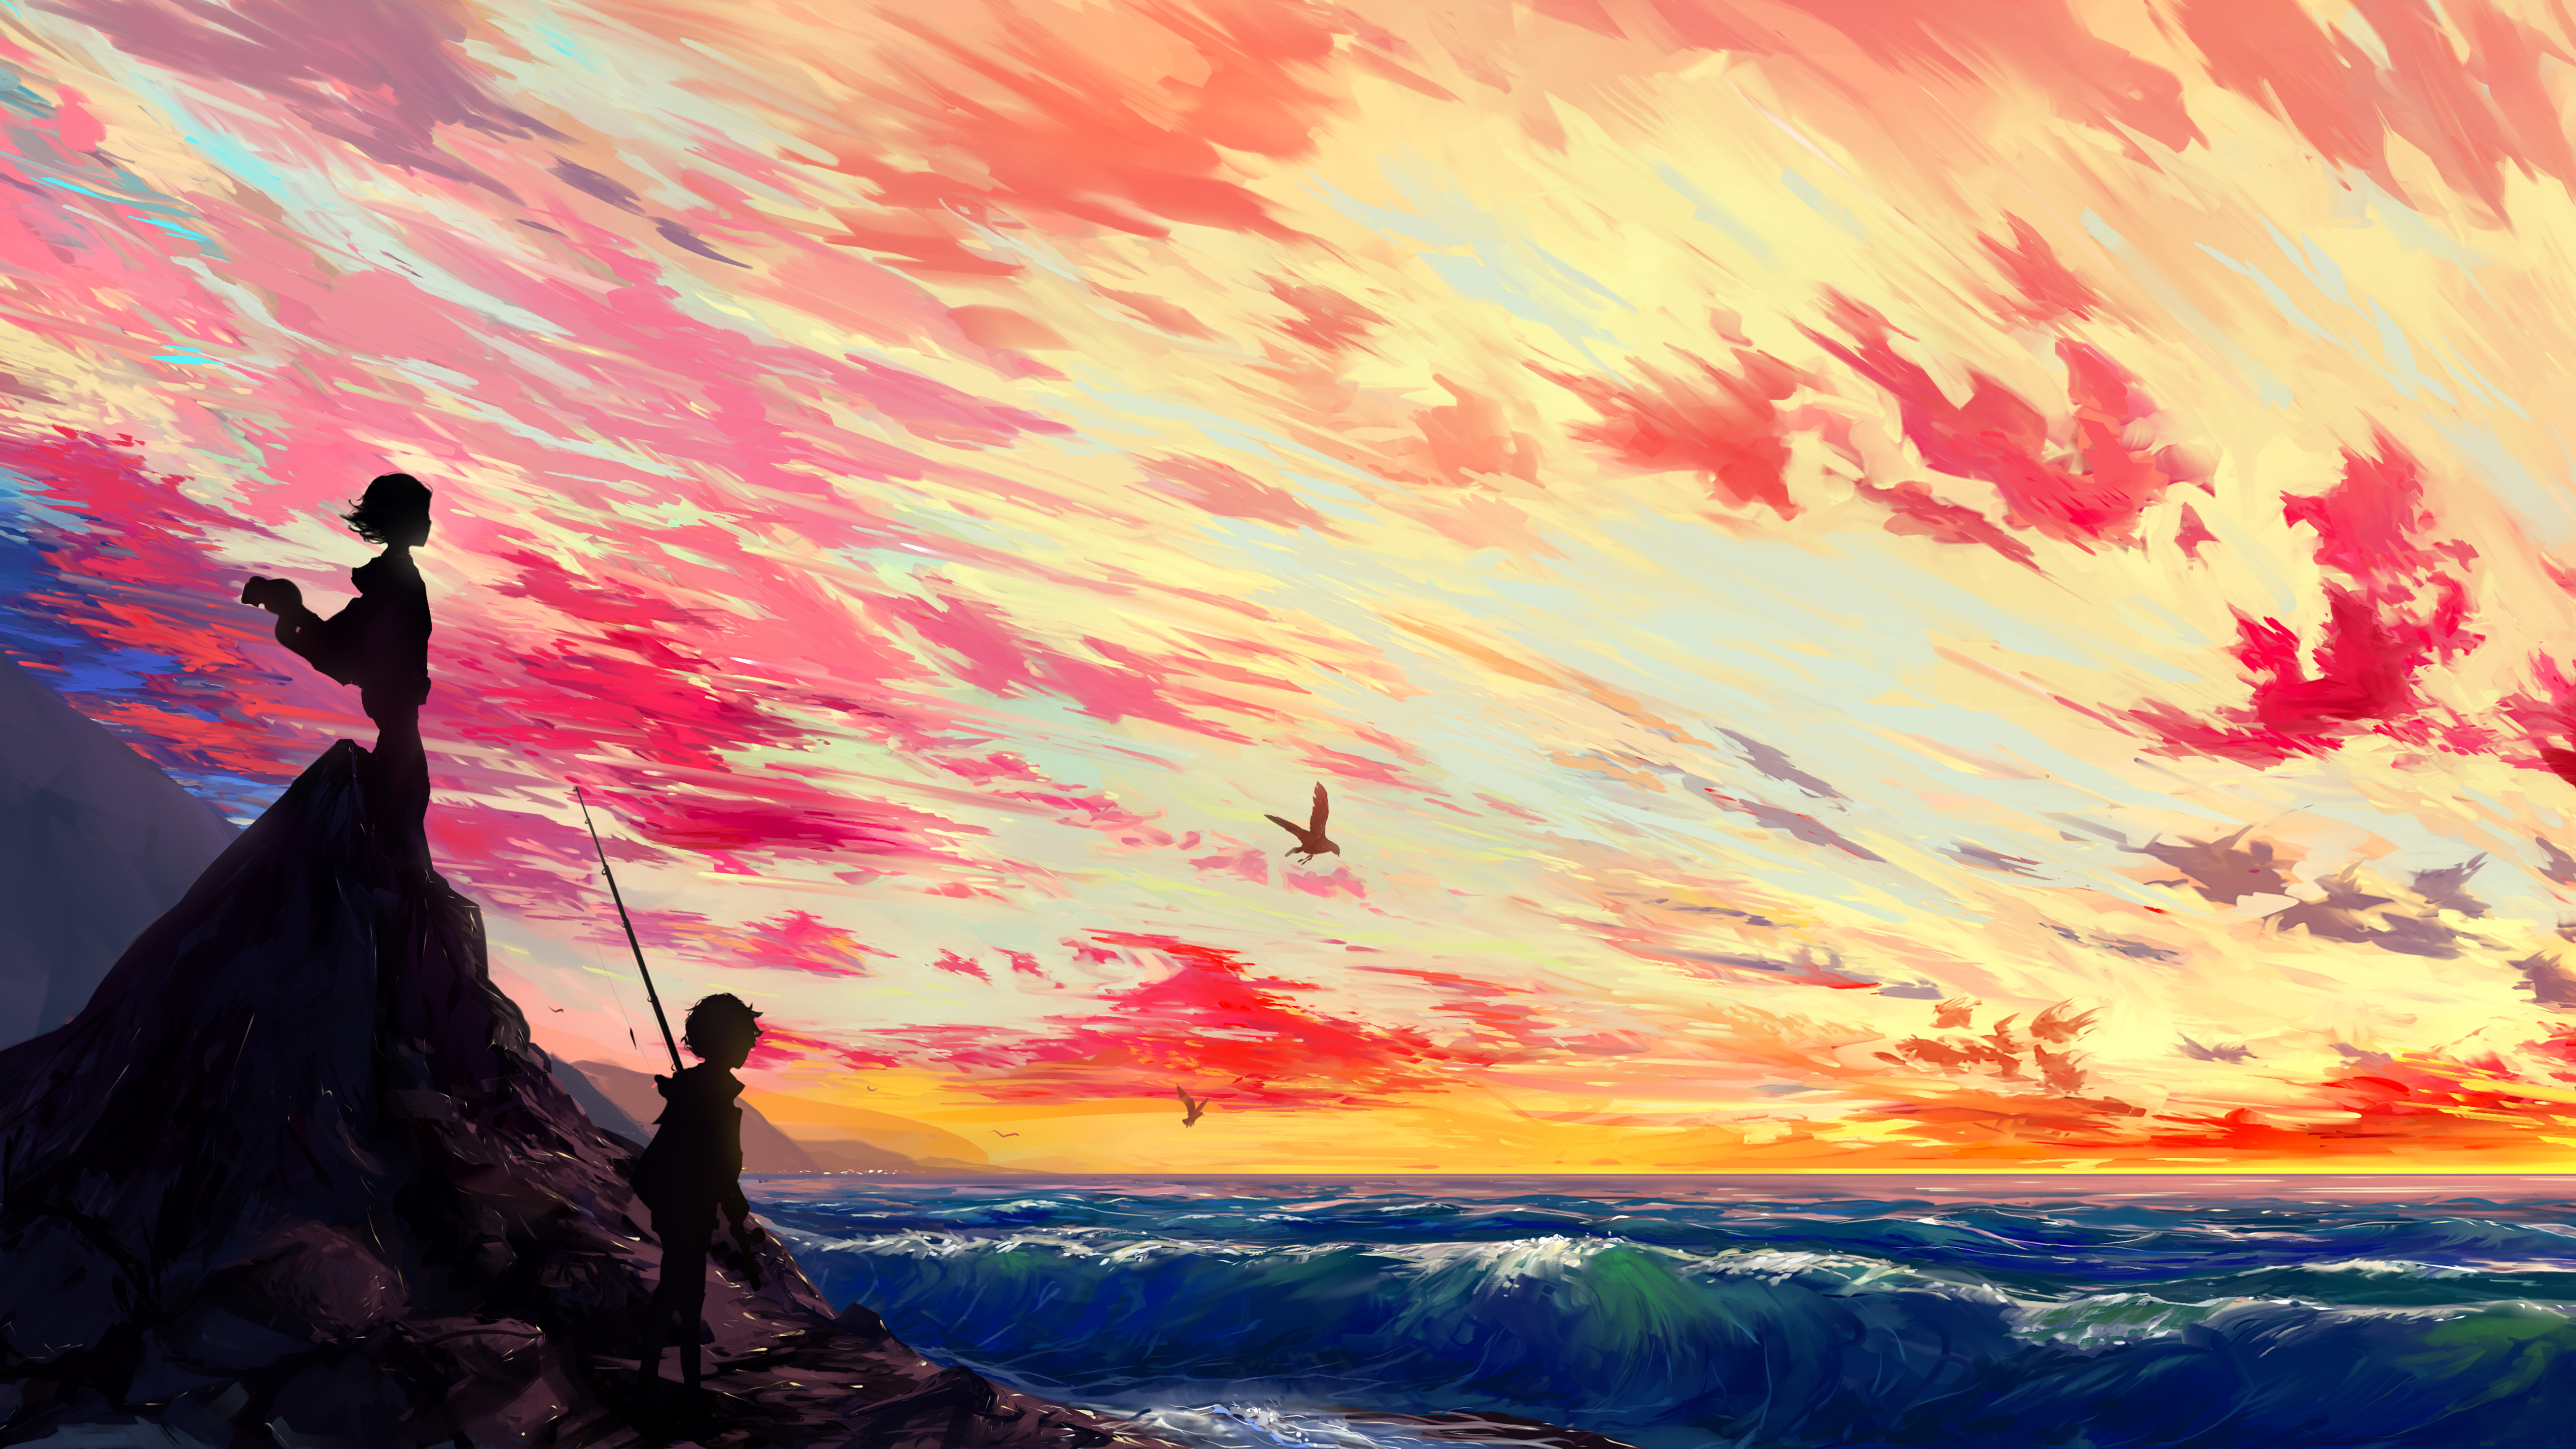 5120x2880 Anime Art 5k 5k Hd 4k Wallpapers Images Backgrounds